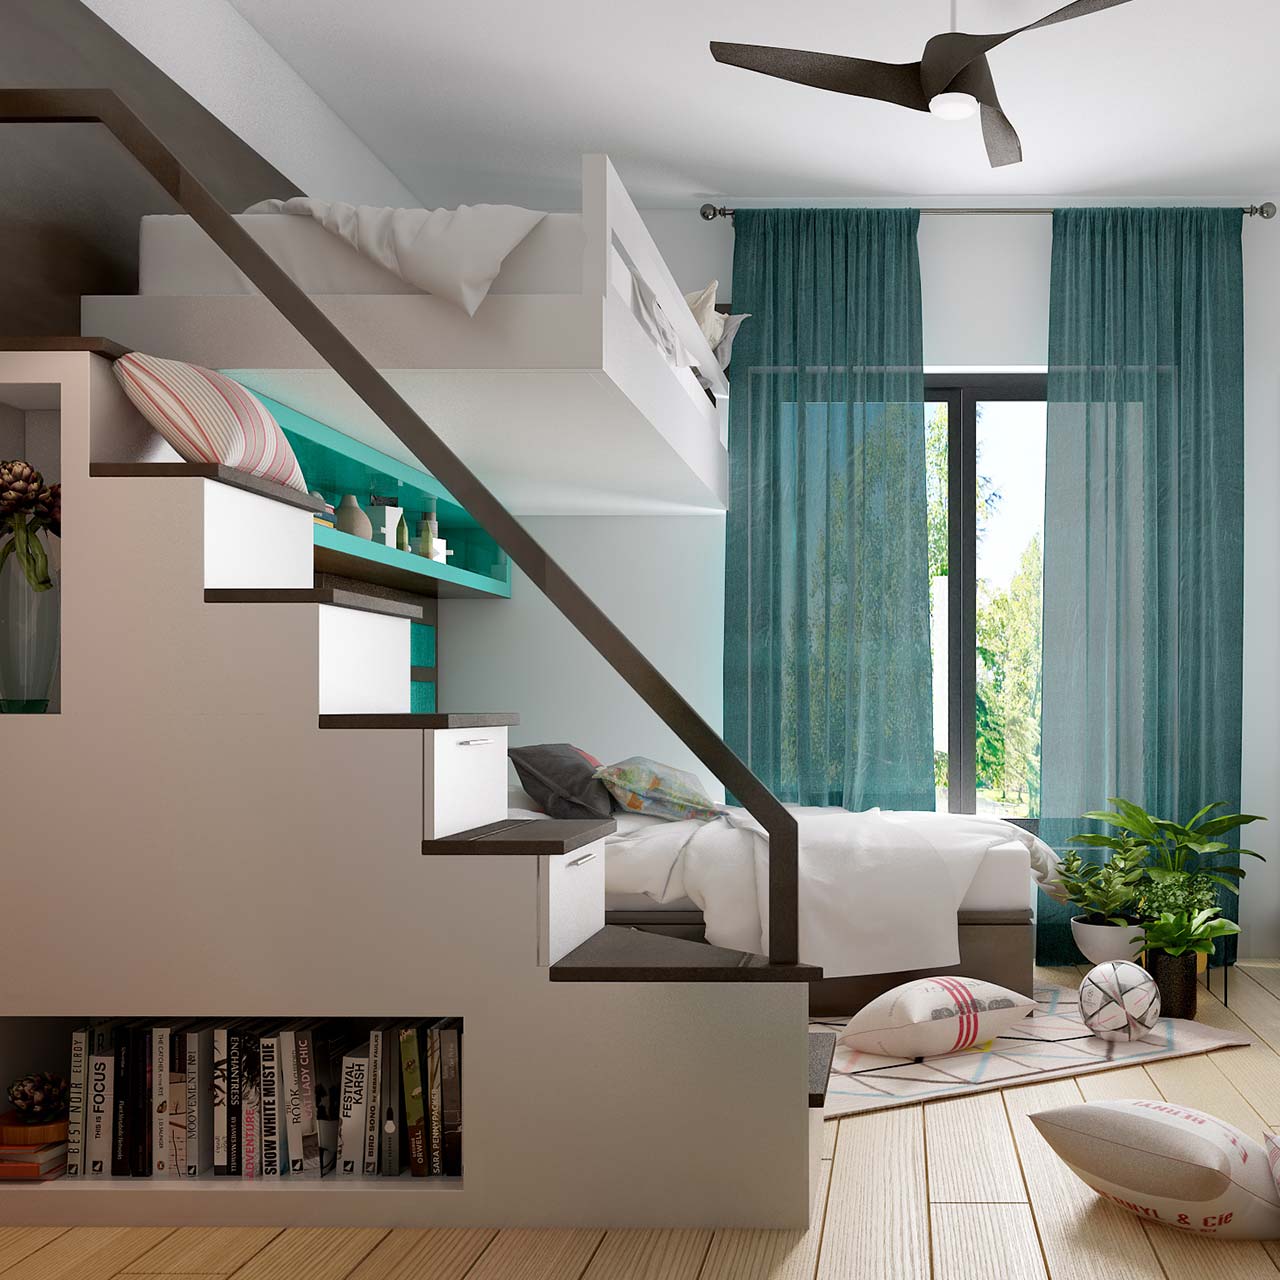 Small bedroom interior design with loft bed is a brilliant space-saving solution